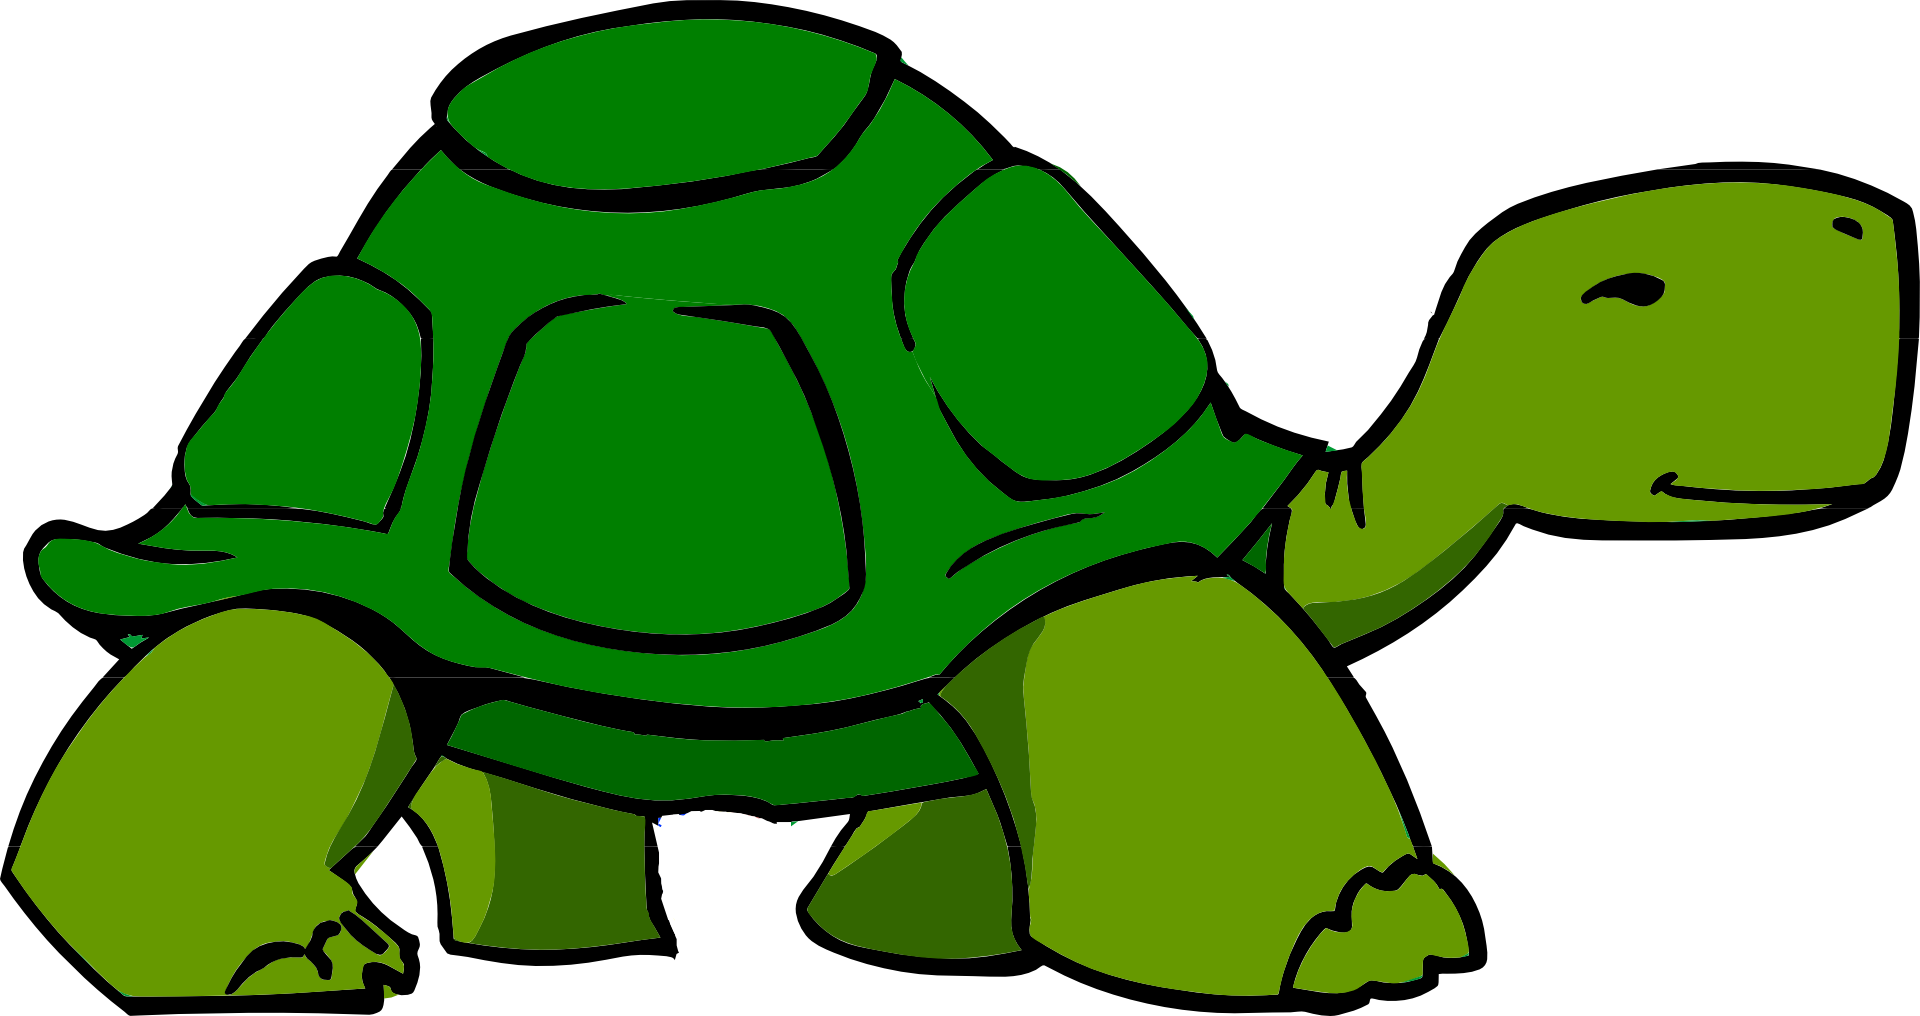 Green green turtle drawing free image download